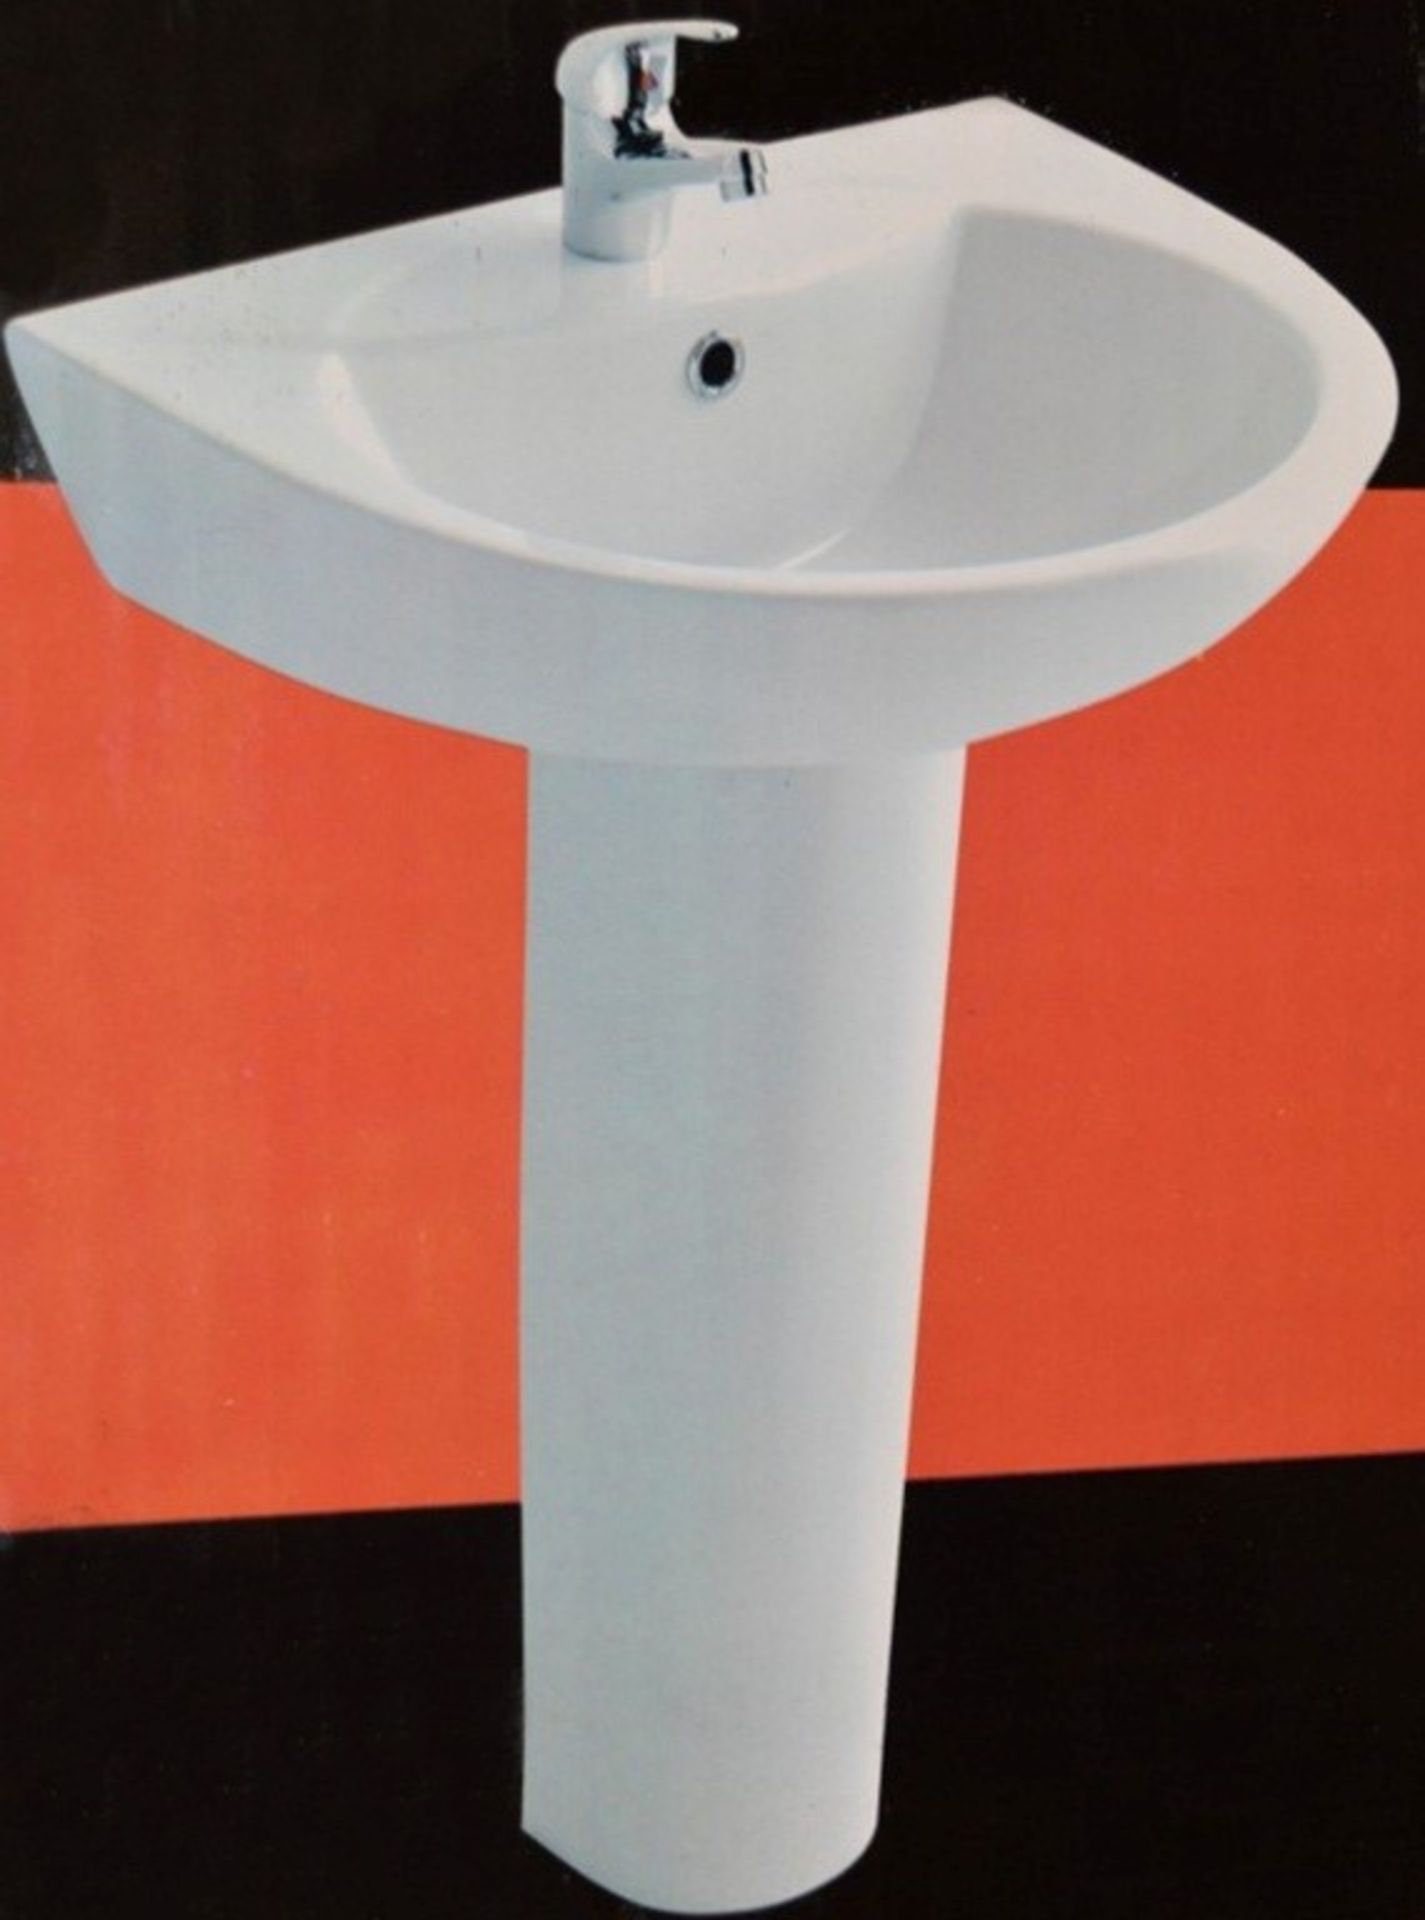 1 x Vogue Bathrooms ECO1 XPRESS Two Tap Hole SINK BASIN and Pedestal - 550mm Width - Brand New and